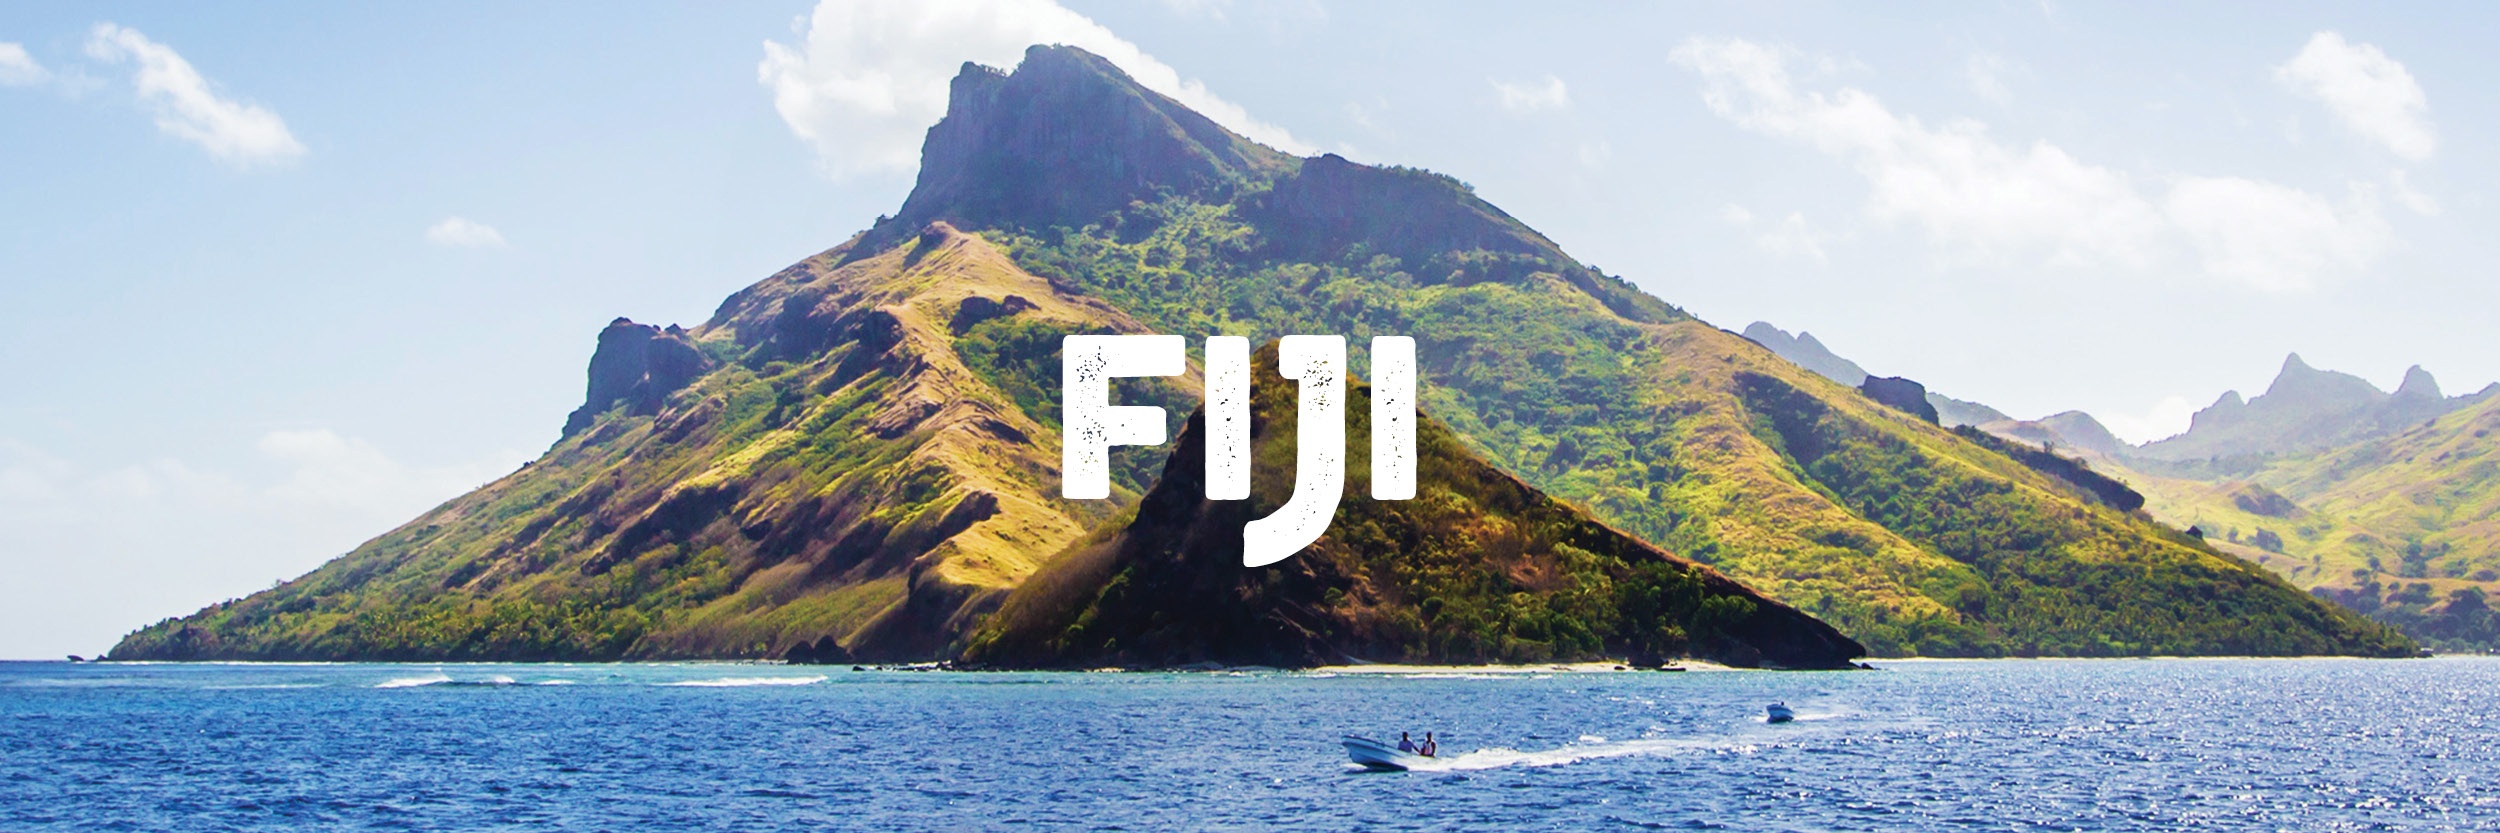 20180926 EE Country Banner Email - Fiji [600x200]2